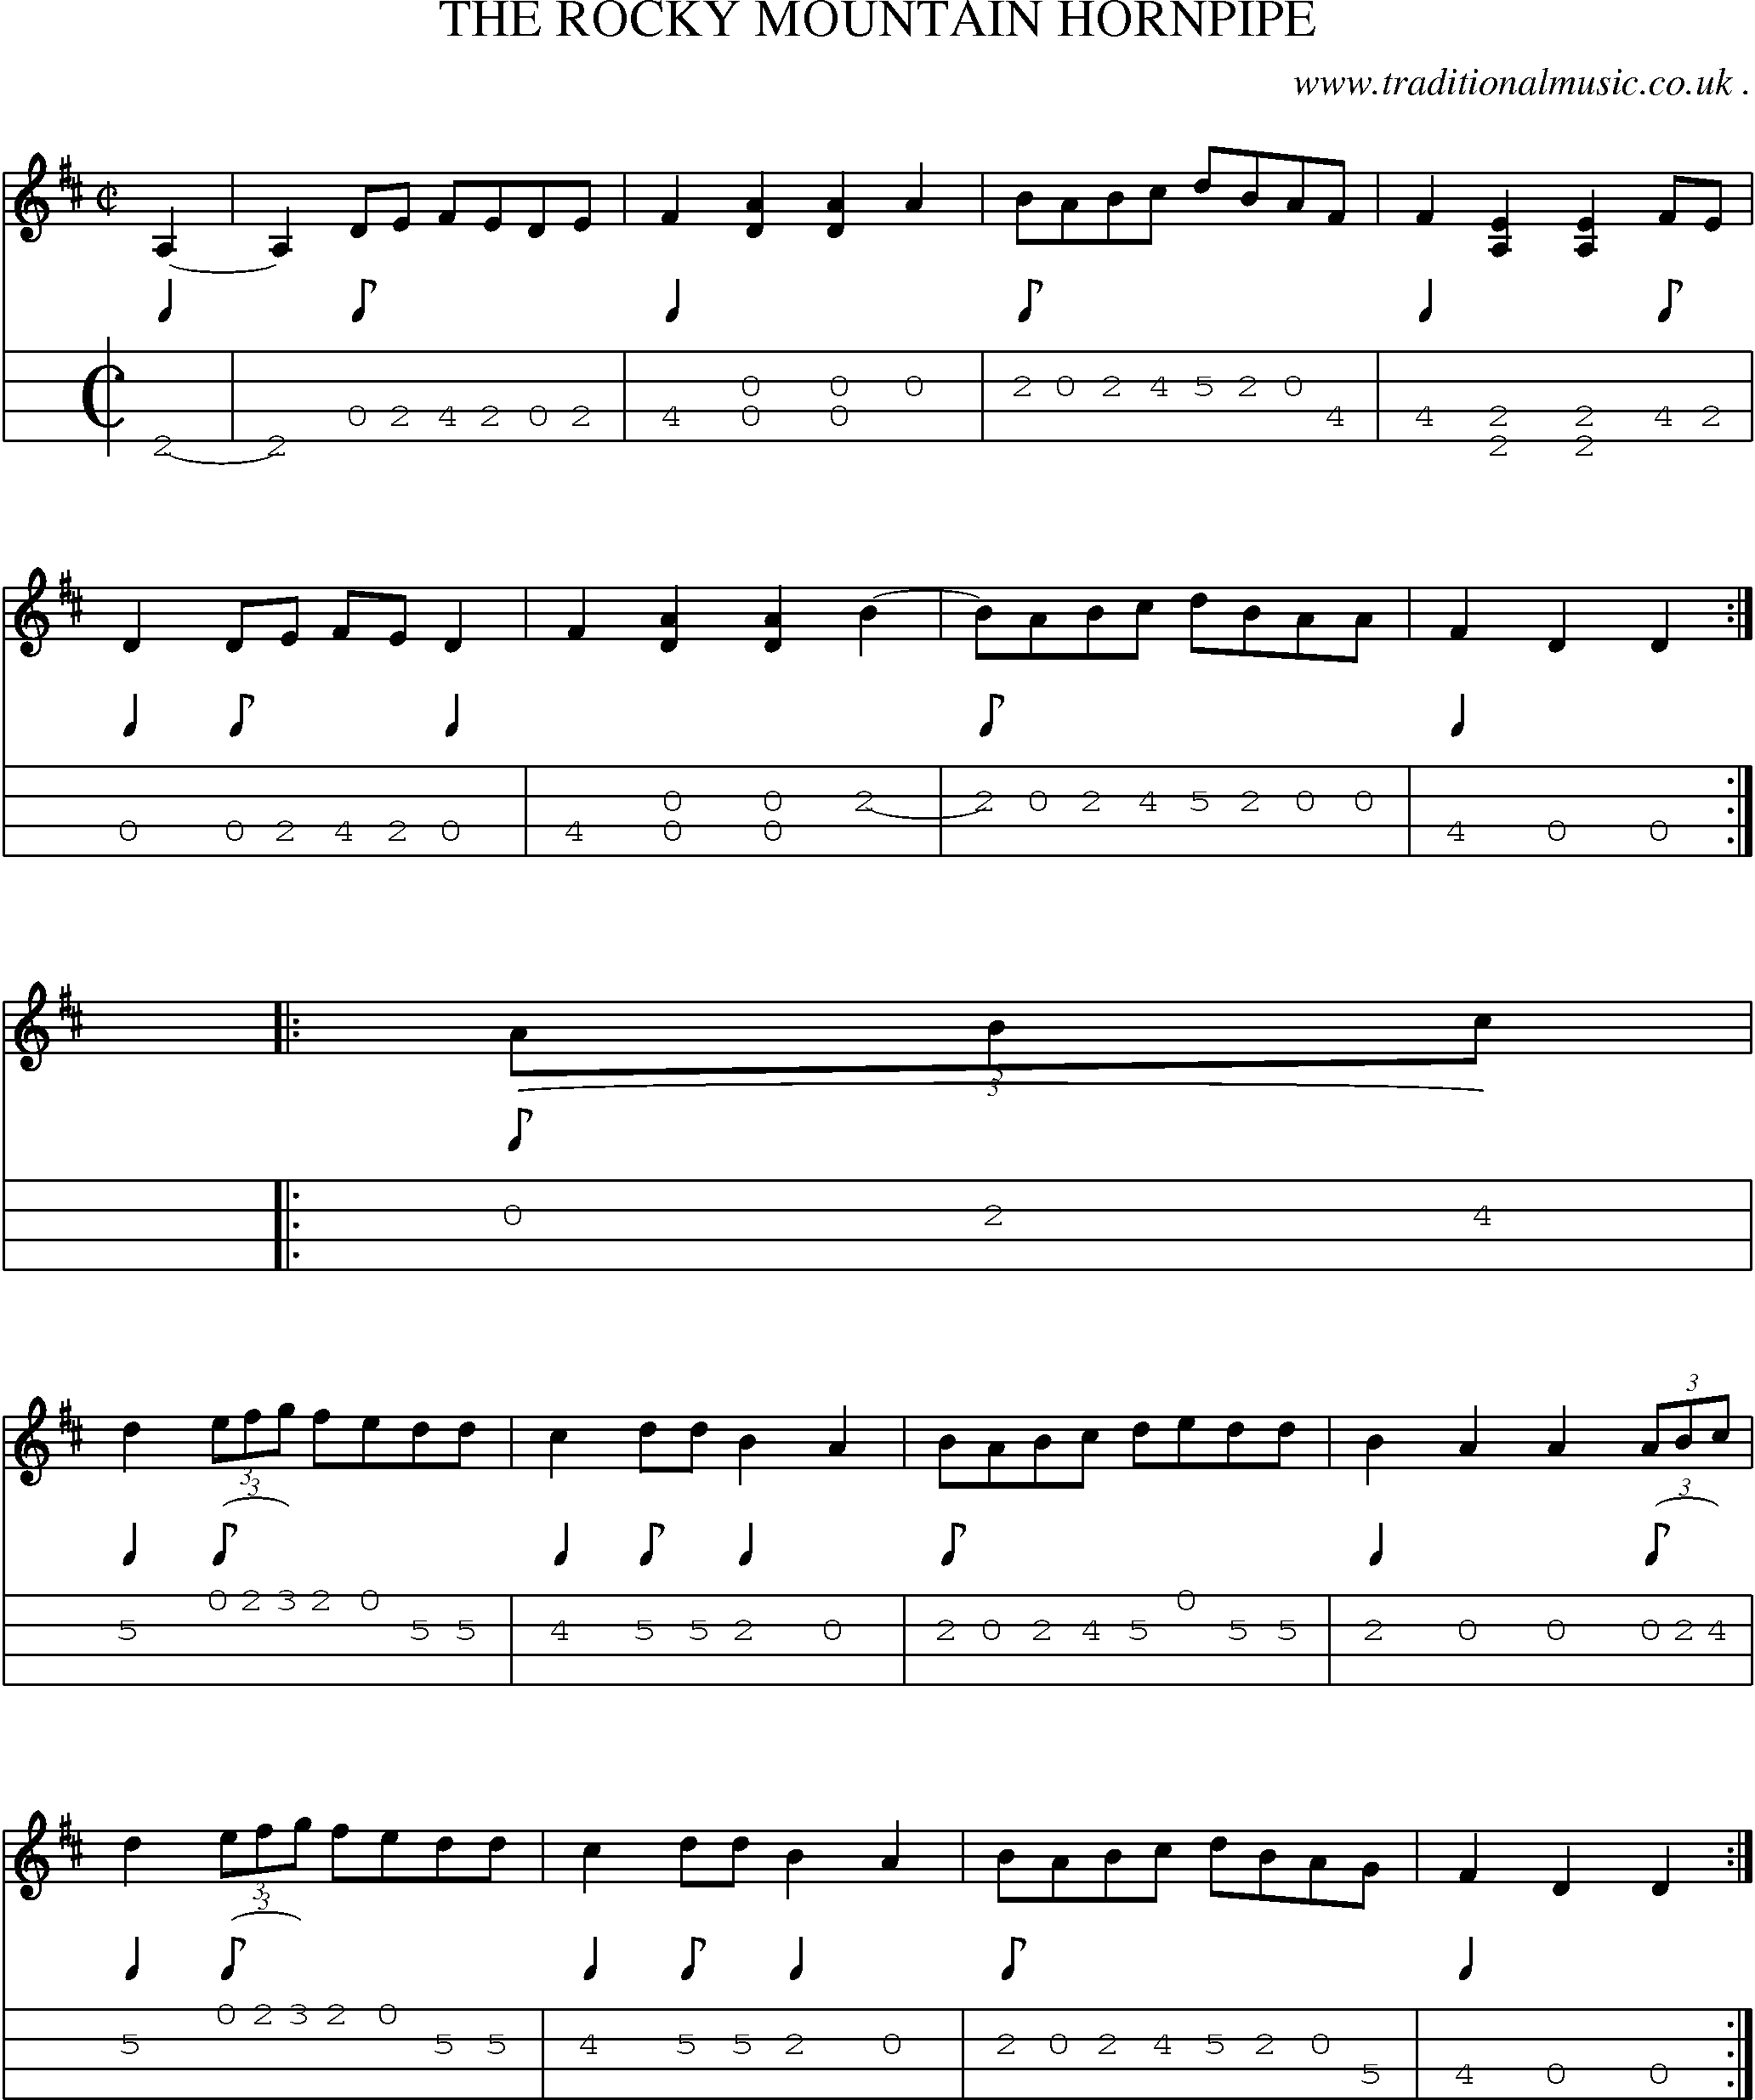 Music Score and Mandolin Tabs for The Rocky Mountain Hornpipe